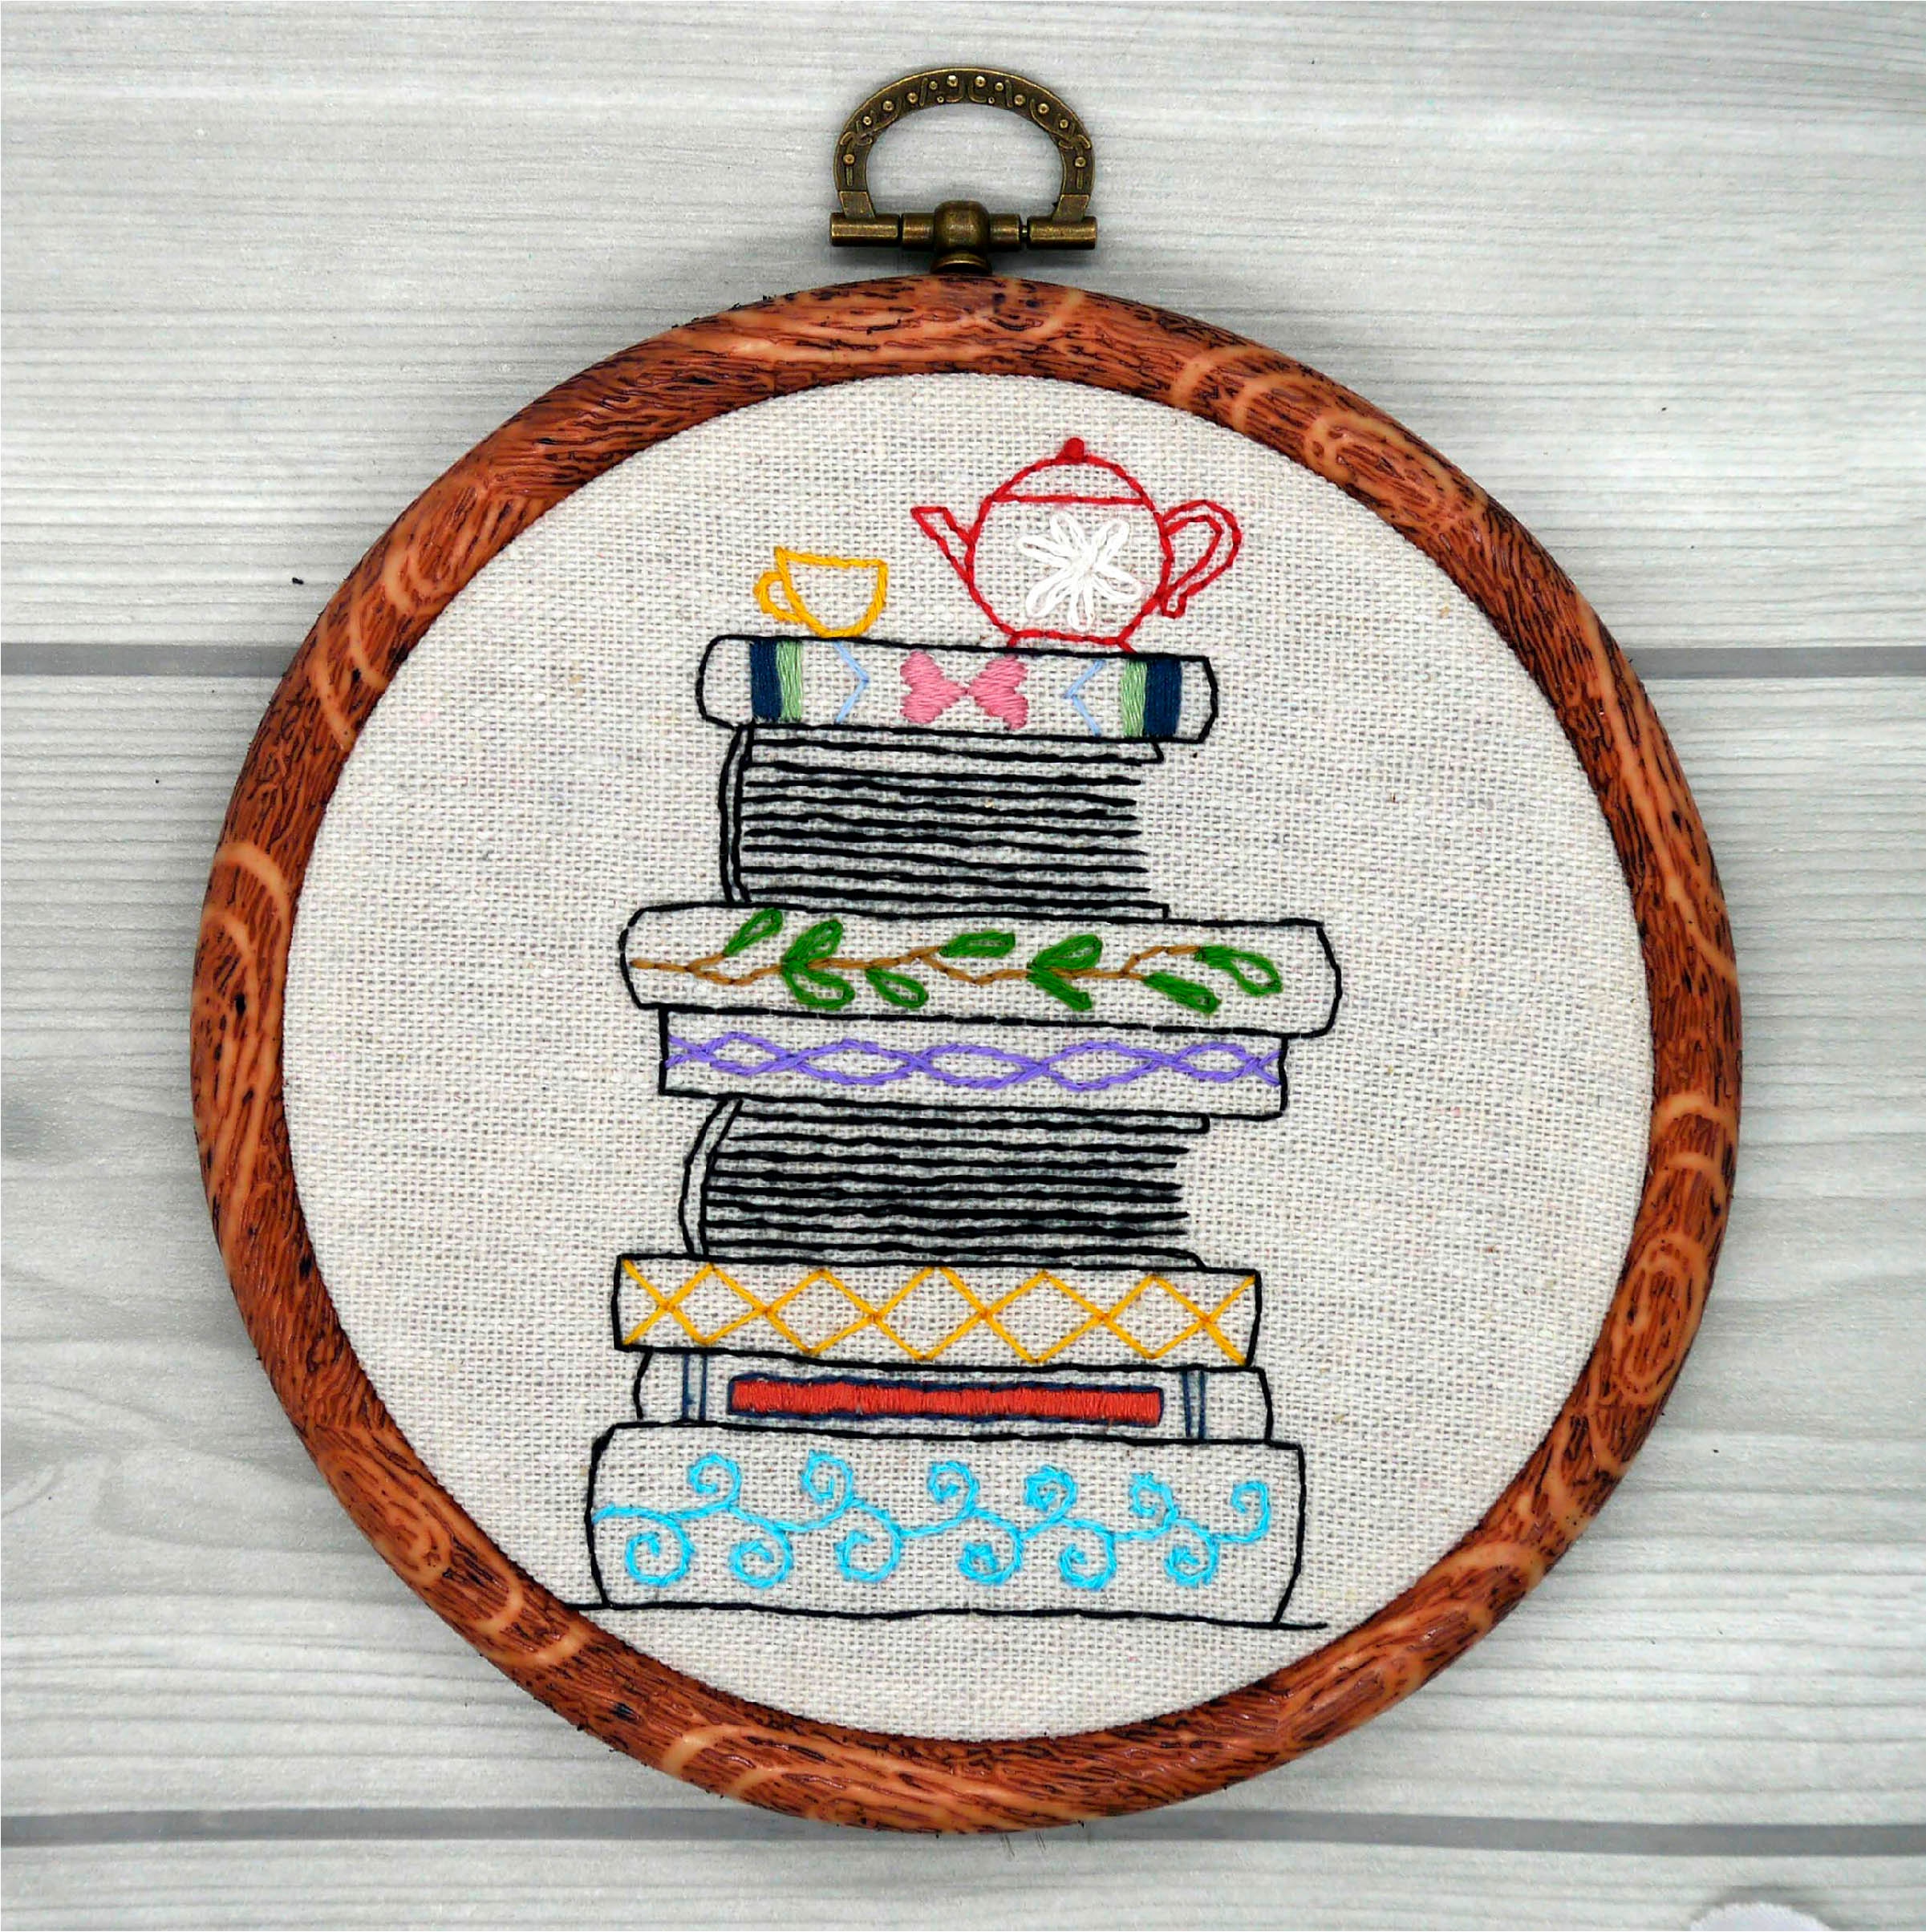 Bookish Cross-Stitch and Embroidery Patterns to Download and Make